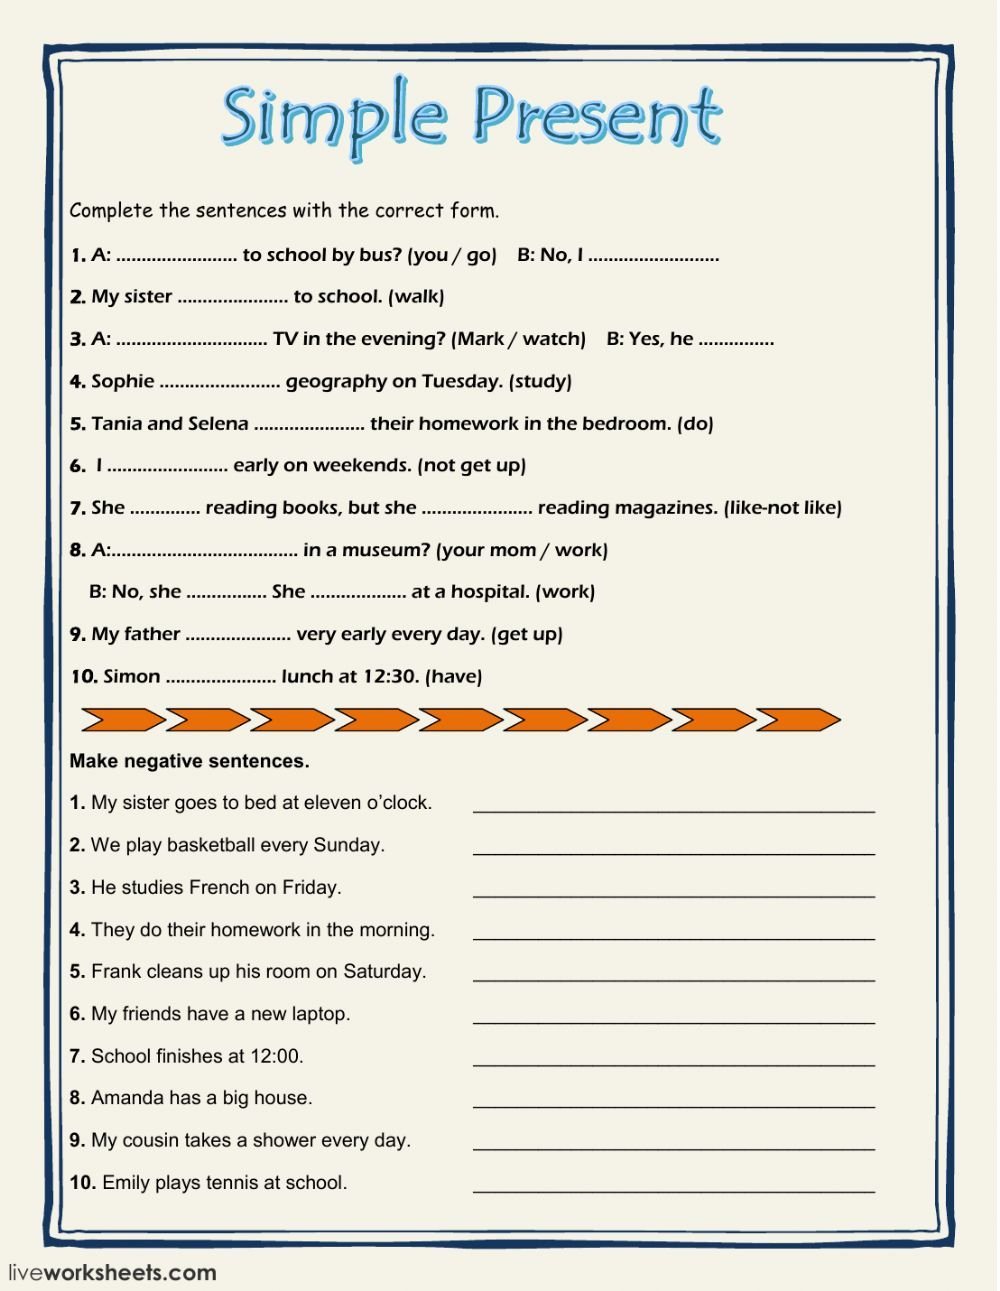 Simple Interest Worksheet Pdf Fresh Present Simple Online Exercise You Can Do the Exercises